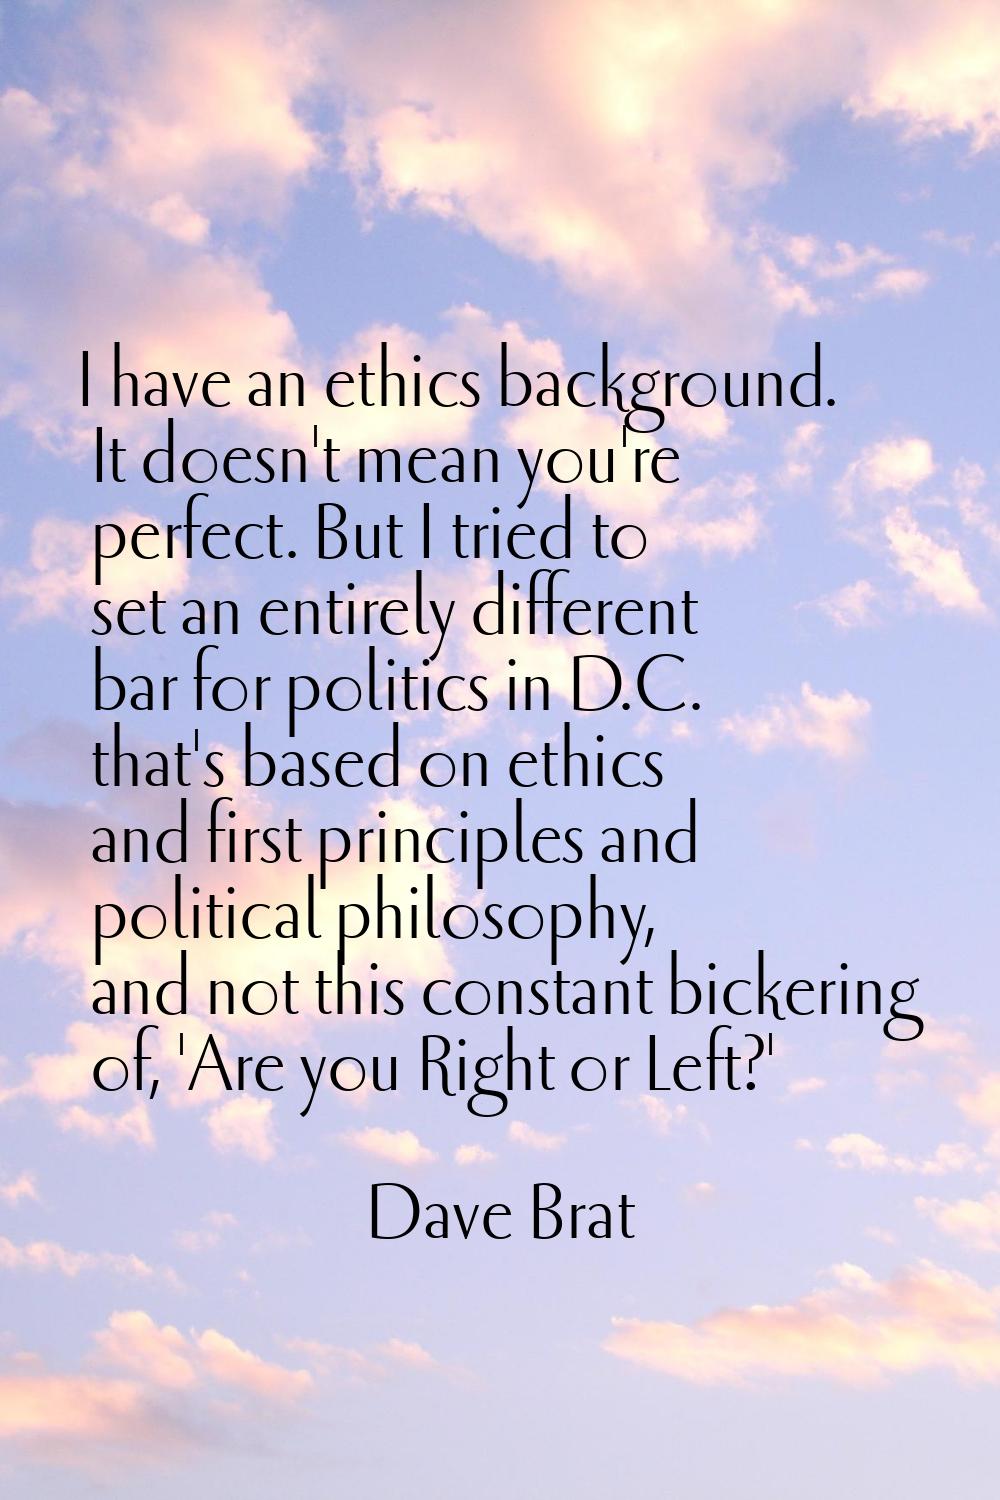 I have an ethics background. It doesn't mean you're perfect. But I tried to set an entirely differe